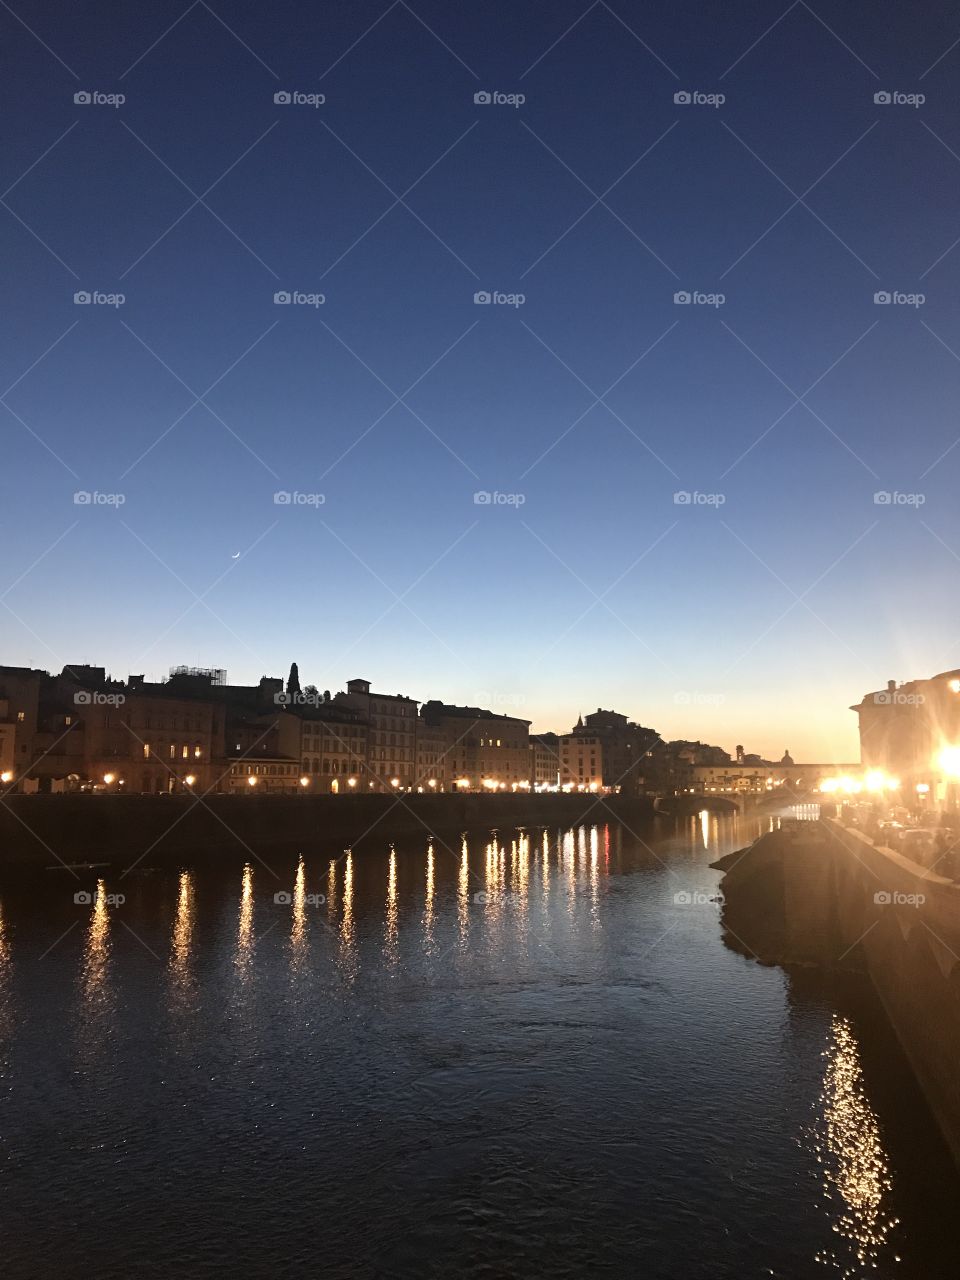 The Arno river and the Ponte vecchio lit by the moonlight and street lights surrounded by the gradient evening sky.